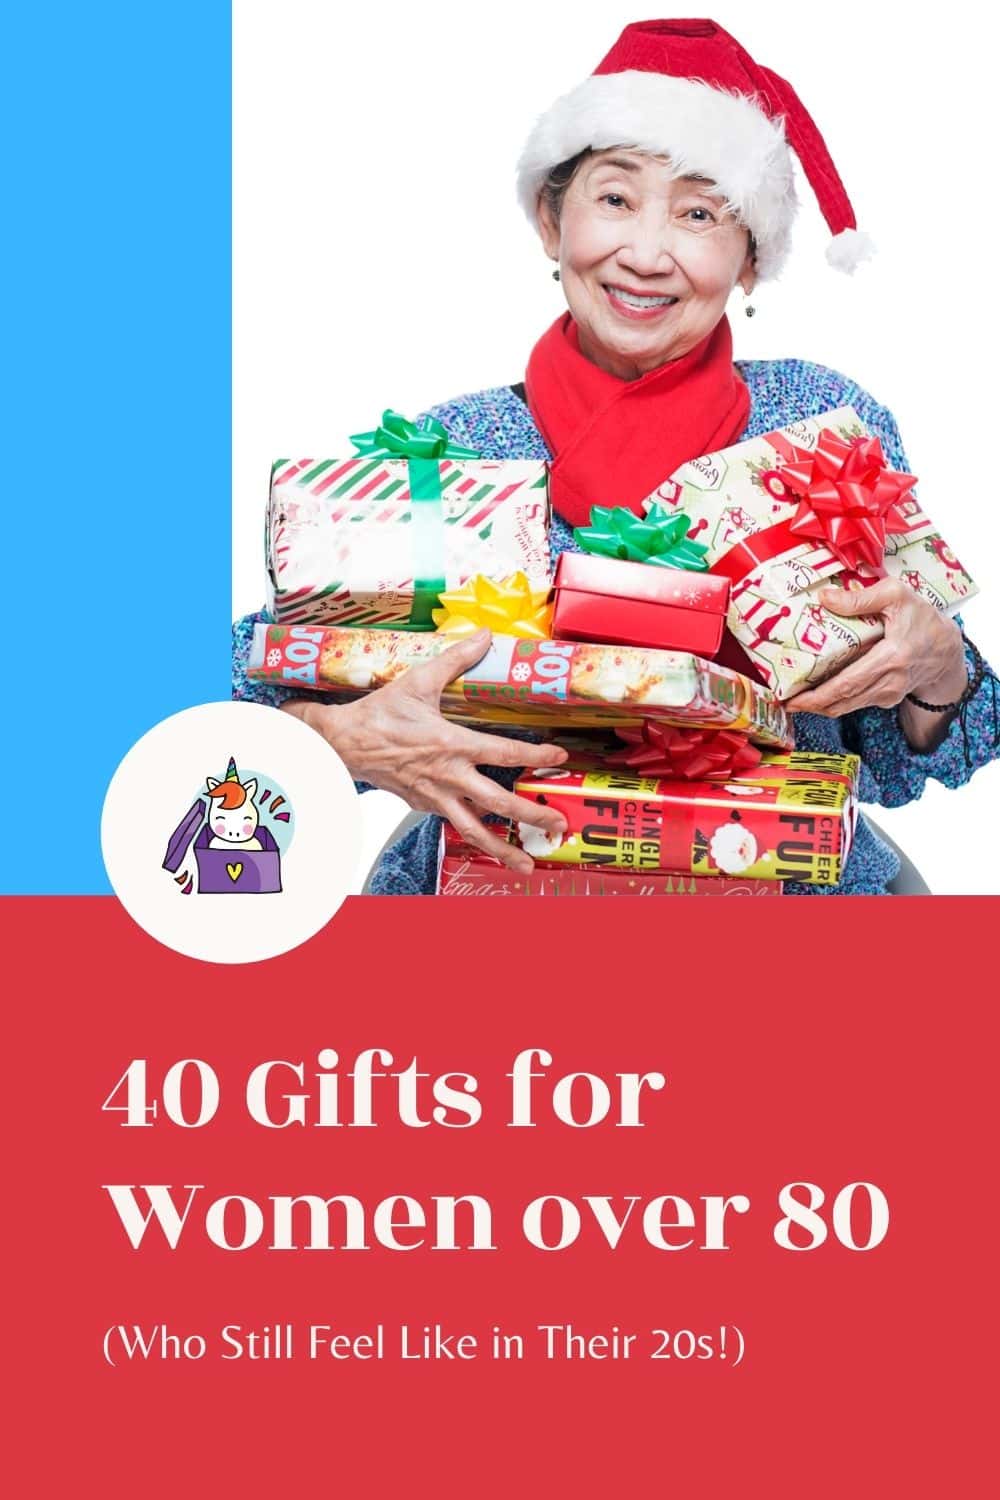 40 gifts for women over 80